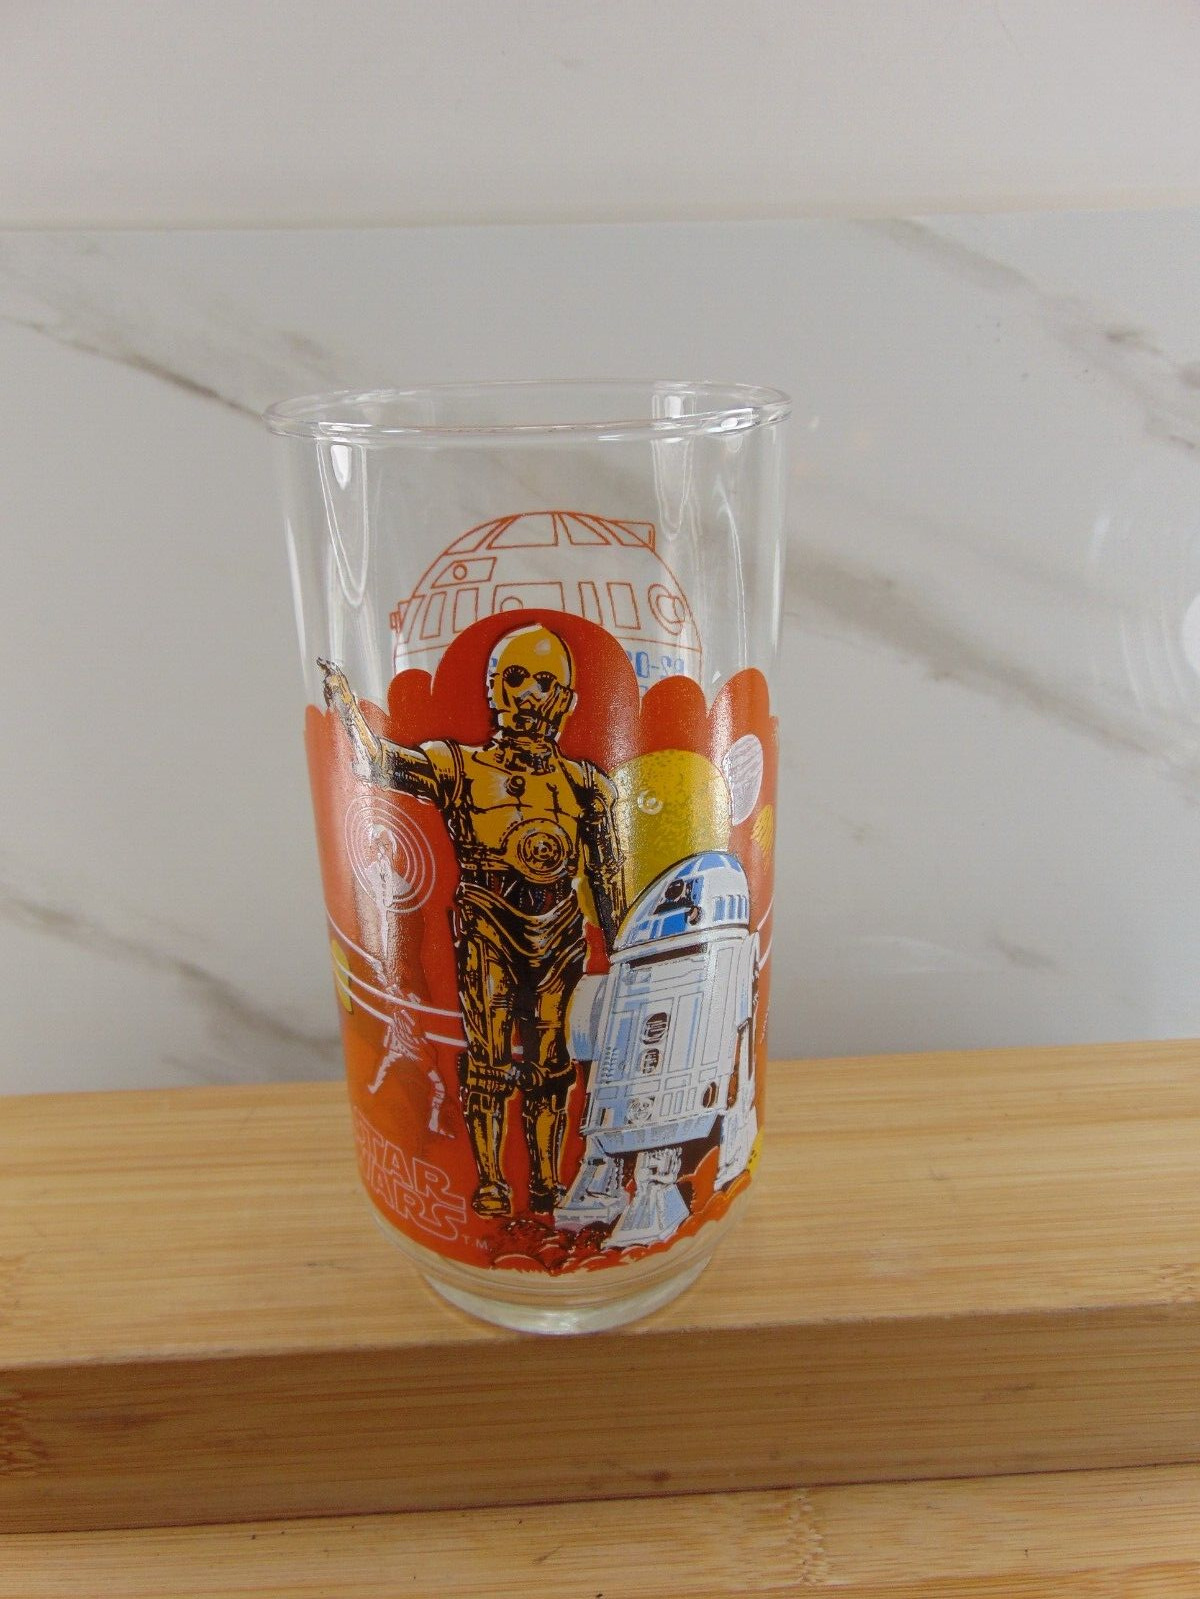 Star Wars Burger King Glass vintage 1977 LIMITED EDITION Rare Mint Condition